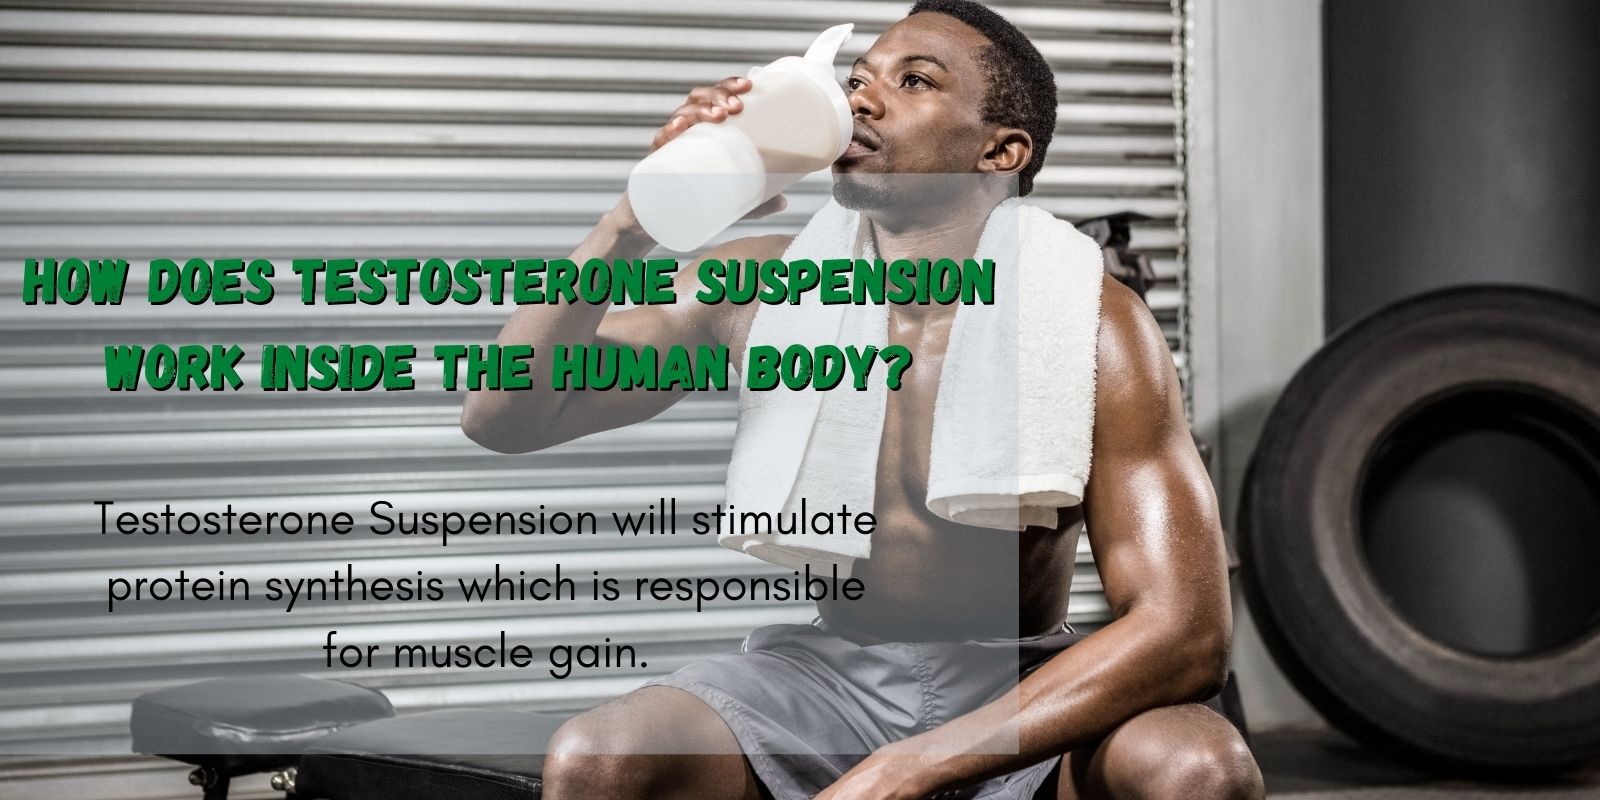 How does Testosterone Suspension work inside the human body_